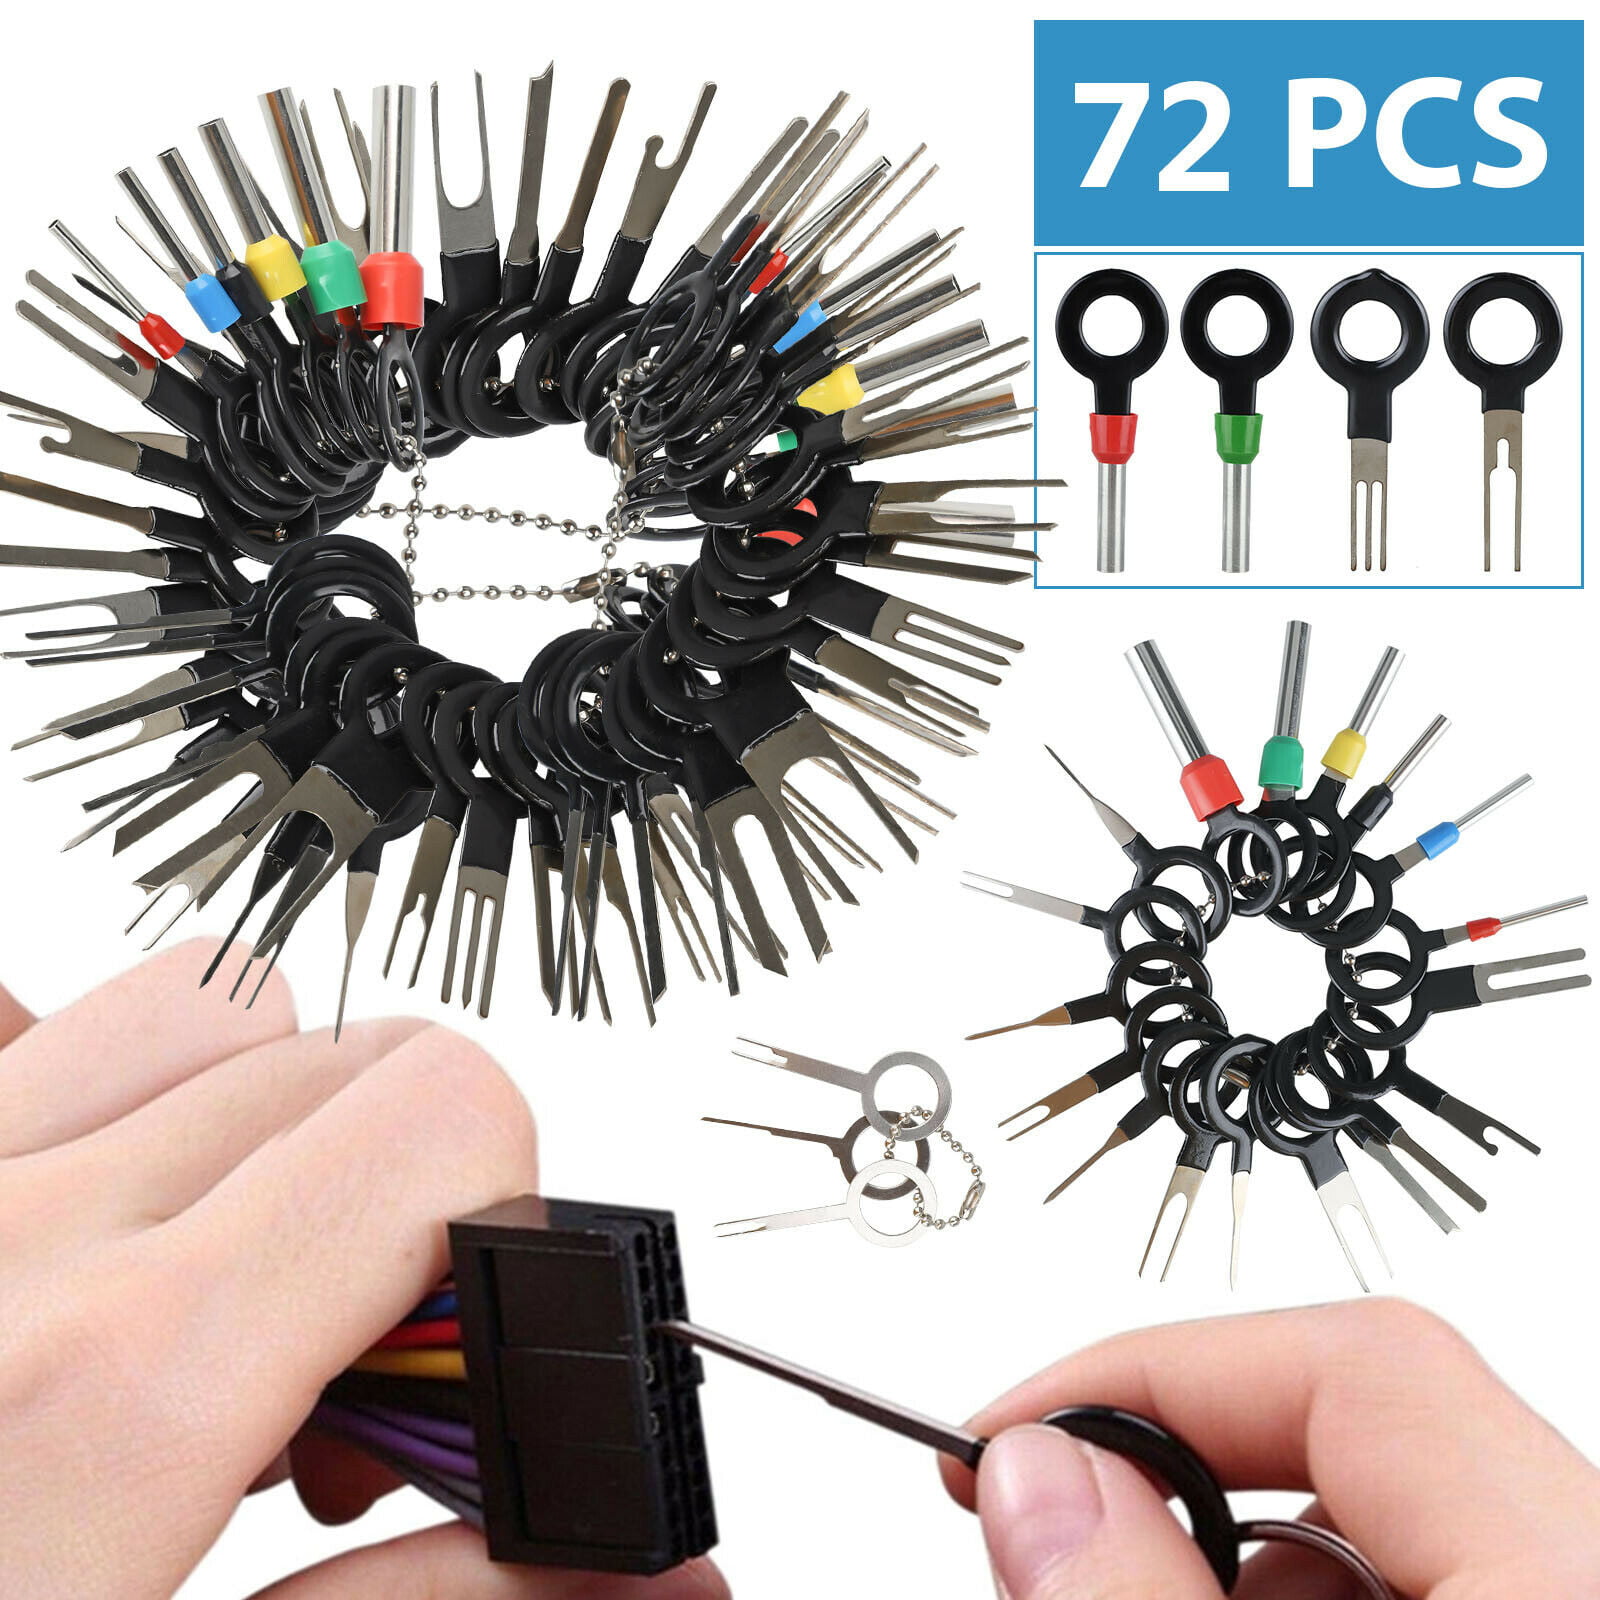 Smyble Terminal Removal Tool kit for Car 52Pcs Pins Terminals Puller Repair Removal Tools for Car Pin Extractor Electrical Wiring Crimp Connectors